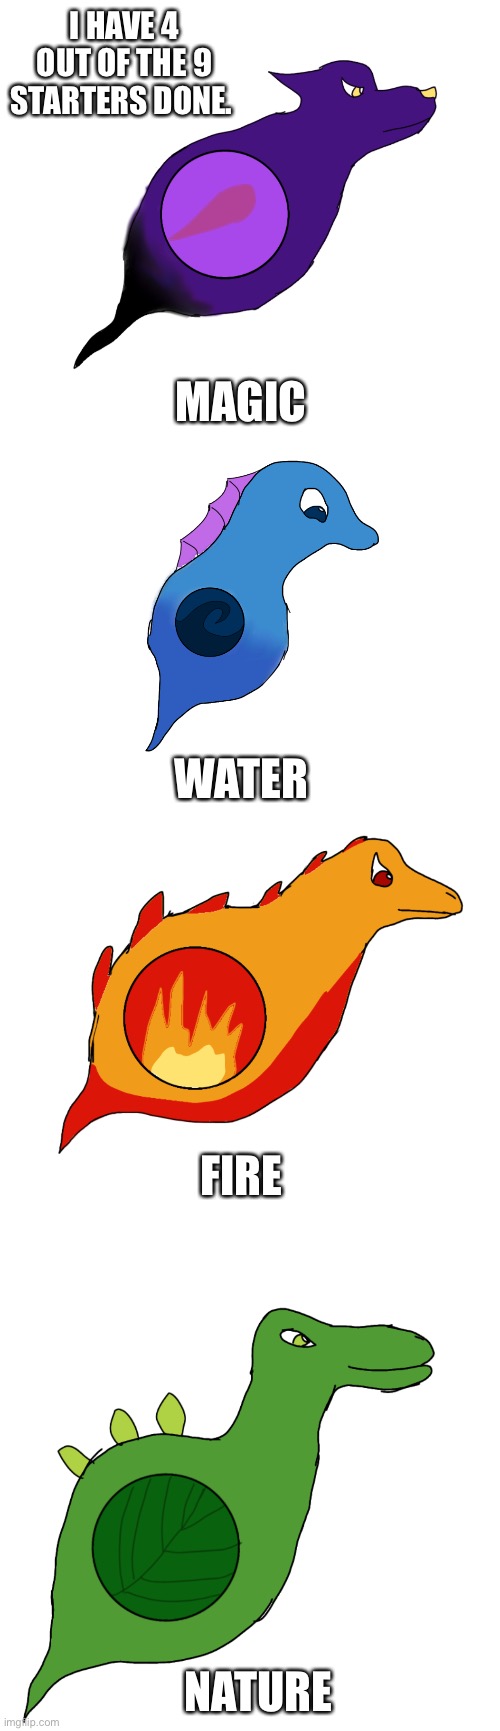 Magic, water, fire, nature. | I HAVE 4 OUT OF THE 9 STARTERS DONE. MAGIC; WATER; FIRE; NATURE | image tagged in ambefoves | made w/ Imgflip meme maker